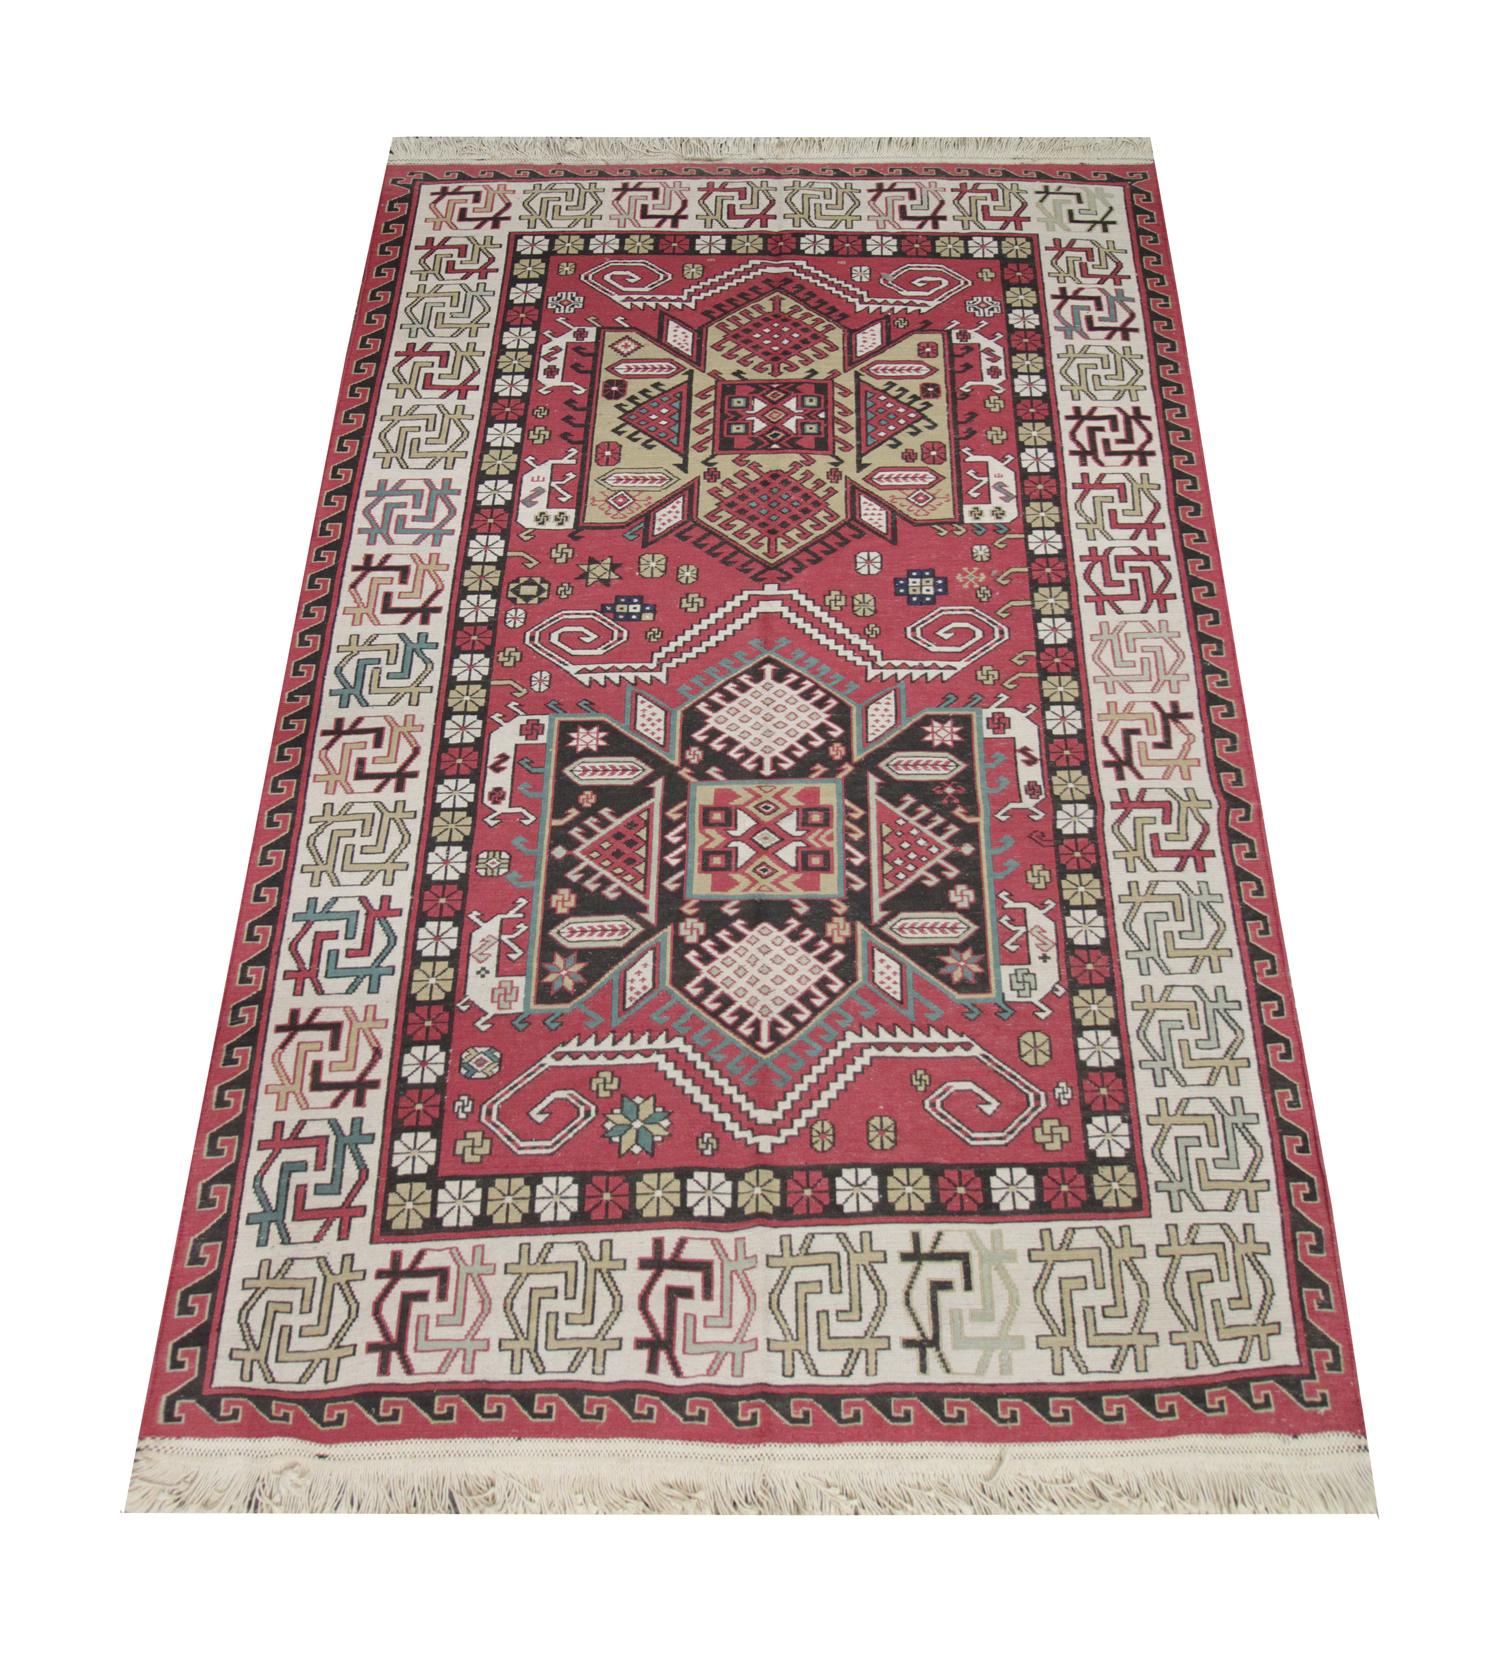 This fine wool area rug is a traditional flat-woven Soumak rug woven by hand in Afghanistan in the early 2000s. The piece is brand new and is in excellent condition. The central design has been woven in a rich red field with two large medallions